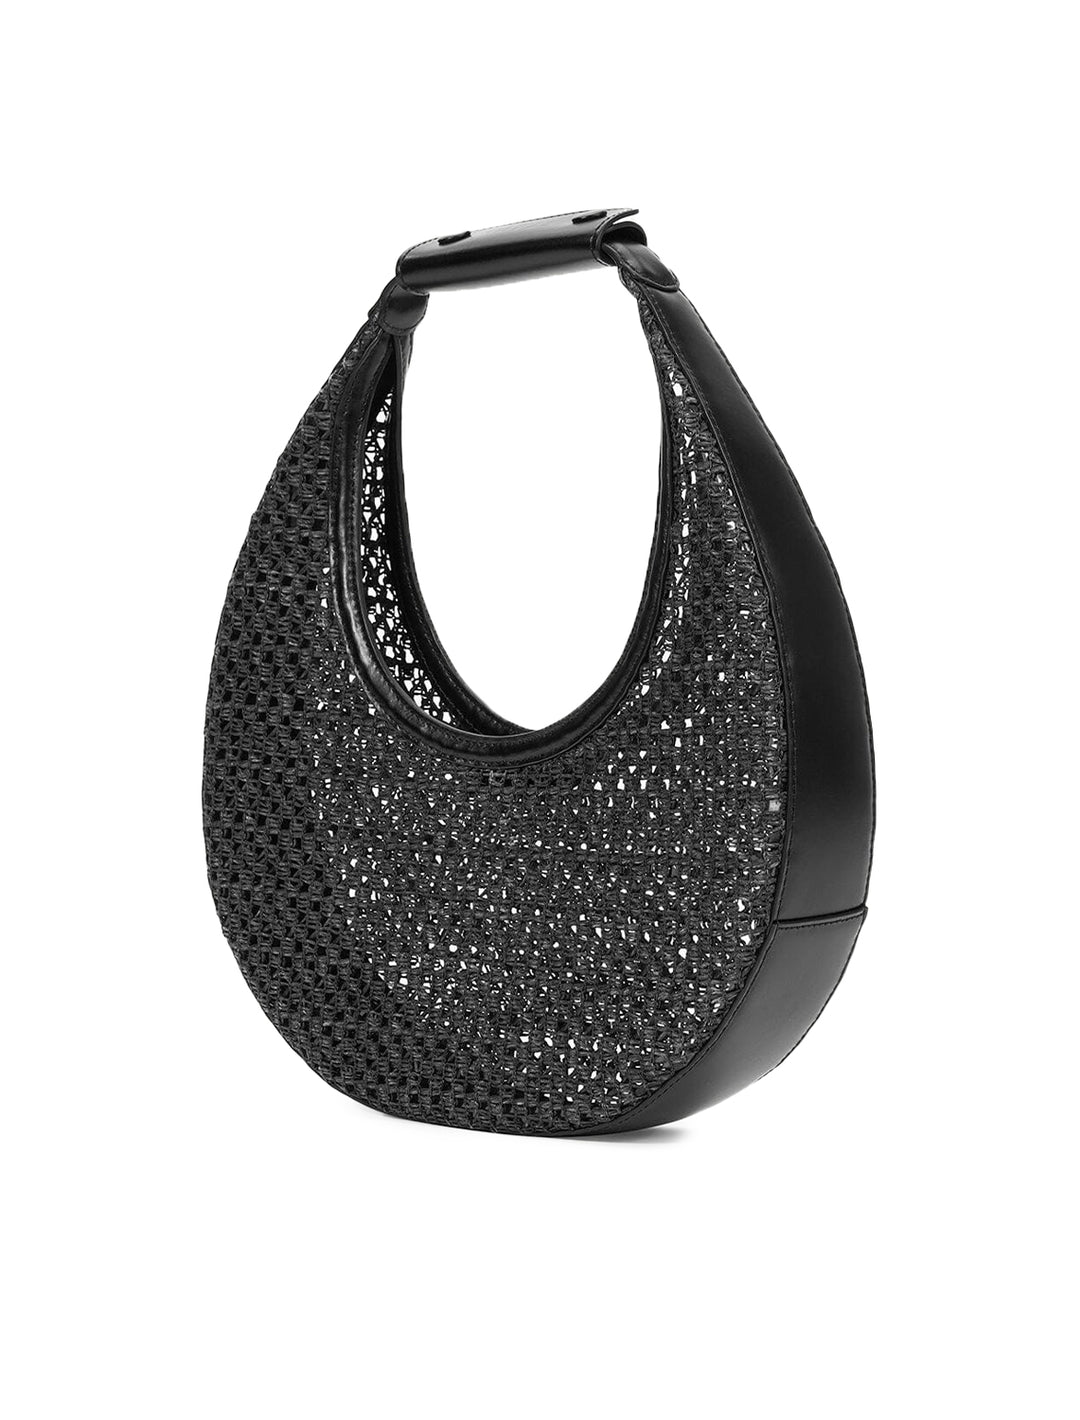 Front angle view of STAUD's moon woven raffia tote bag in black.